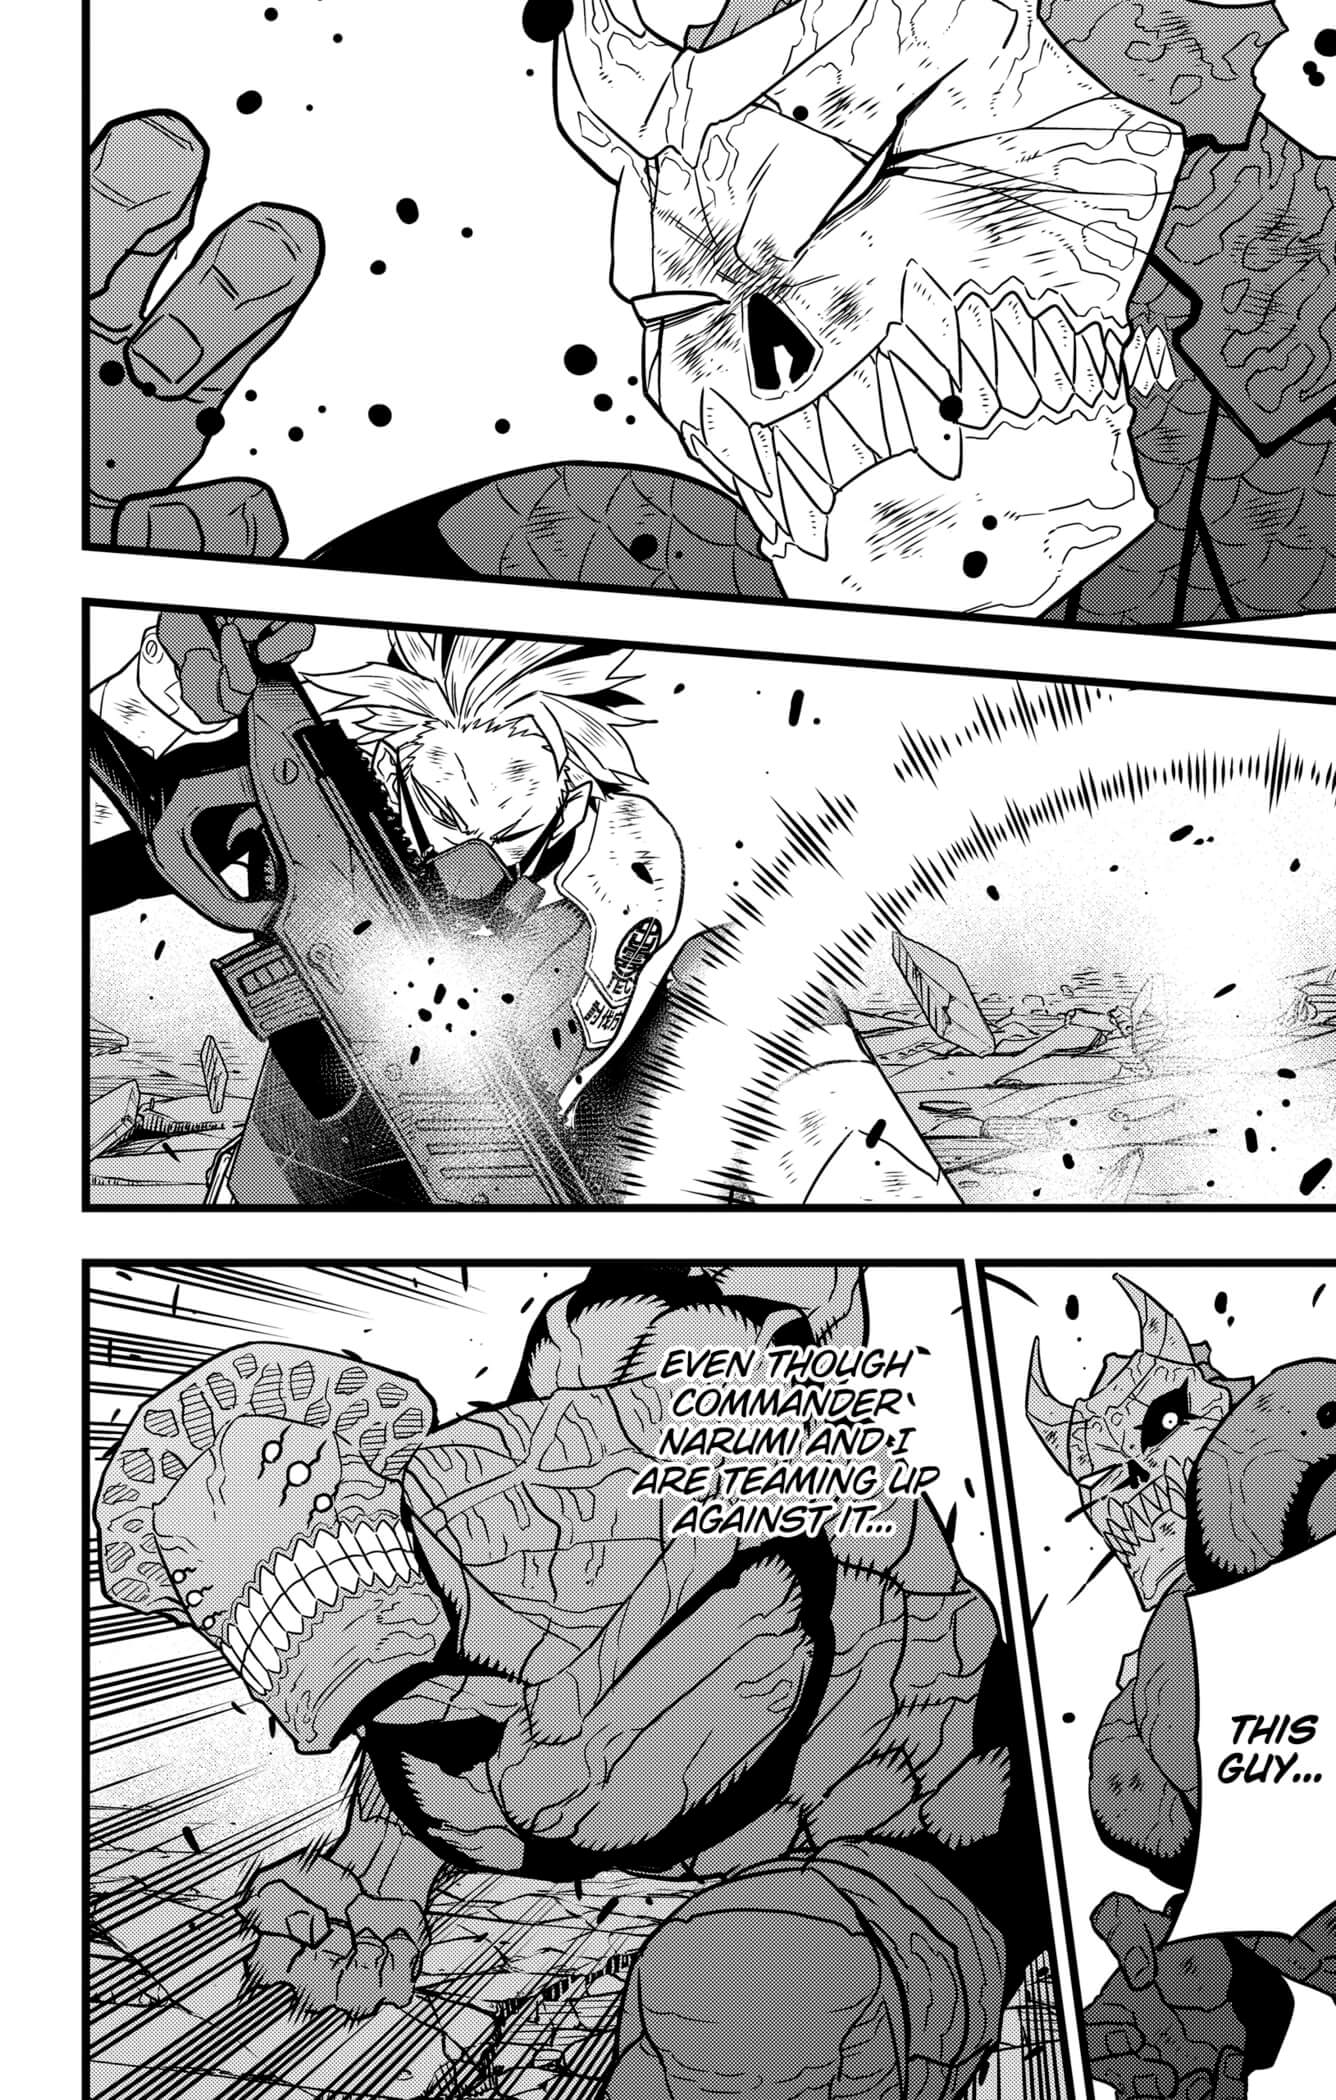 Kaiju no 8 Chapter 53, monster #8 chapter 53